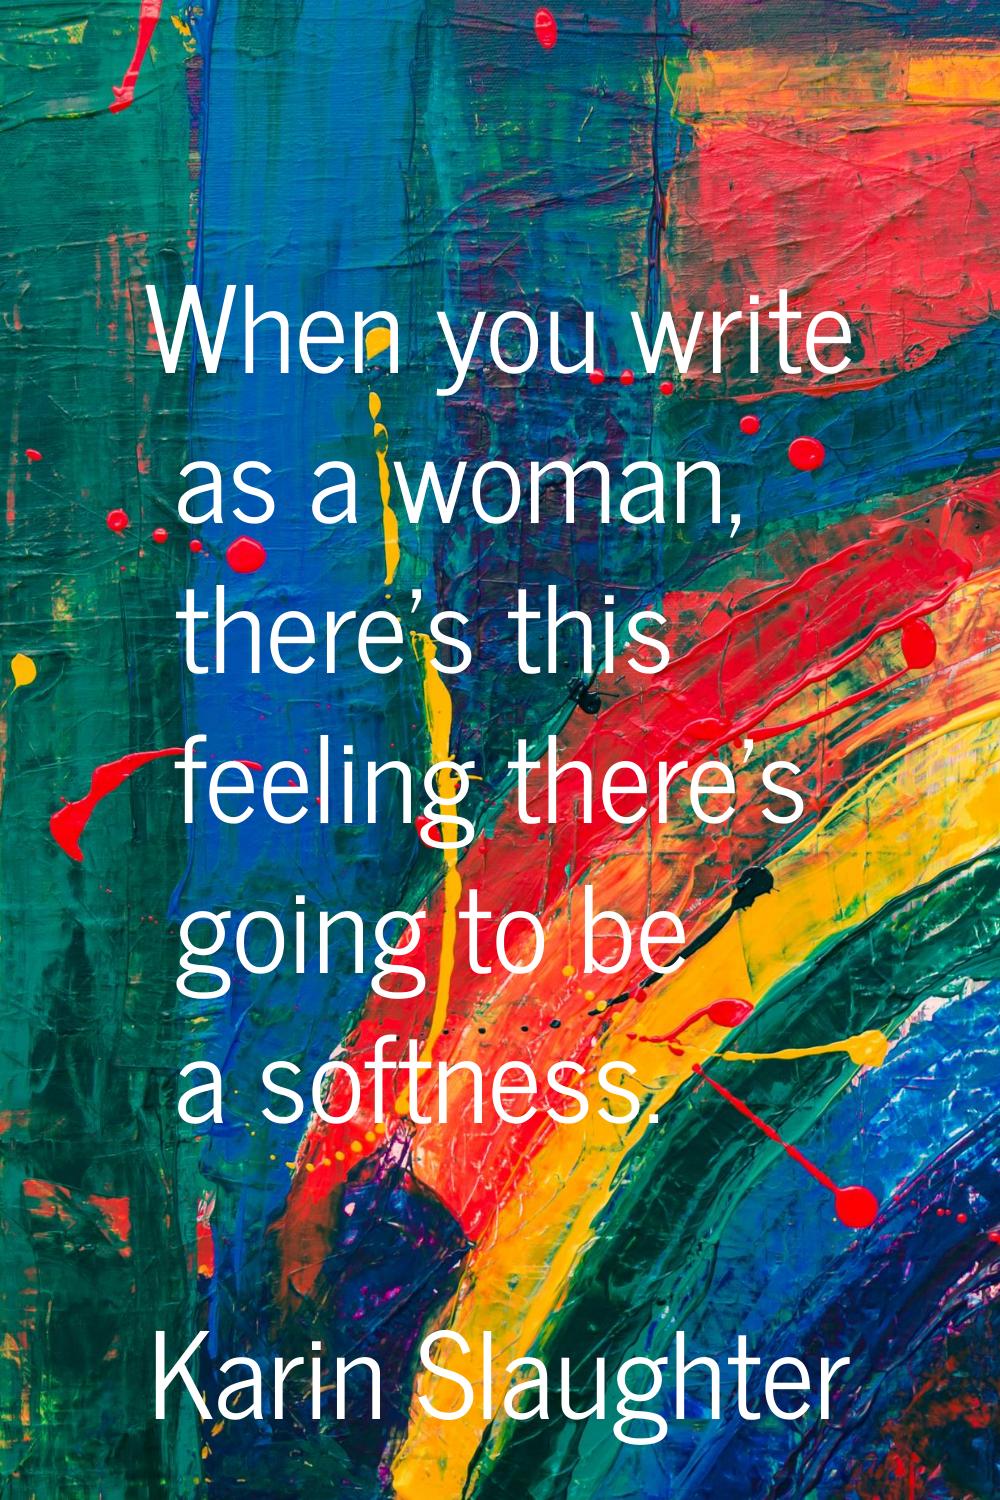 When you write as a woman, there's this feeling there's going to be a softness.